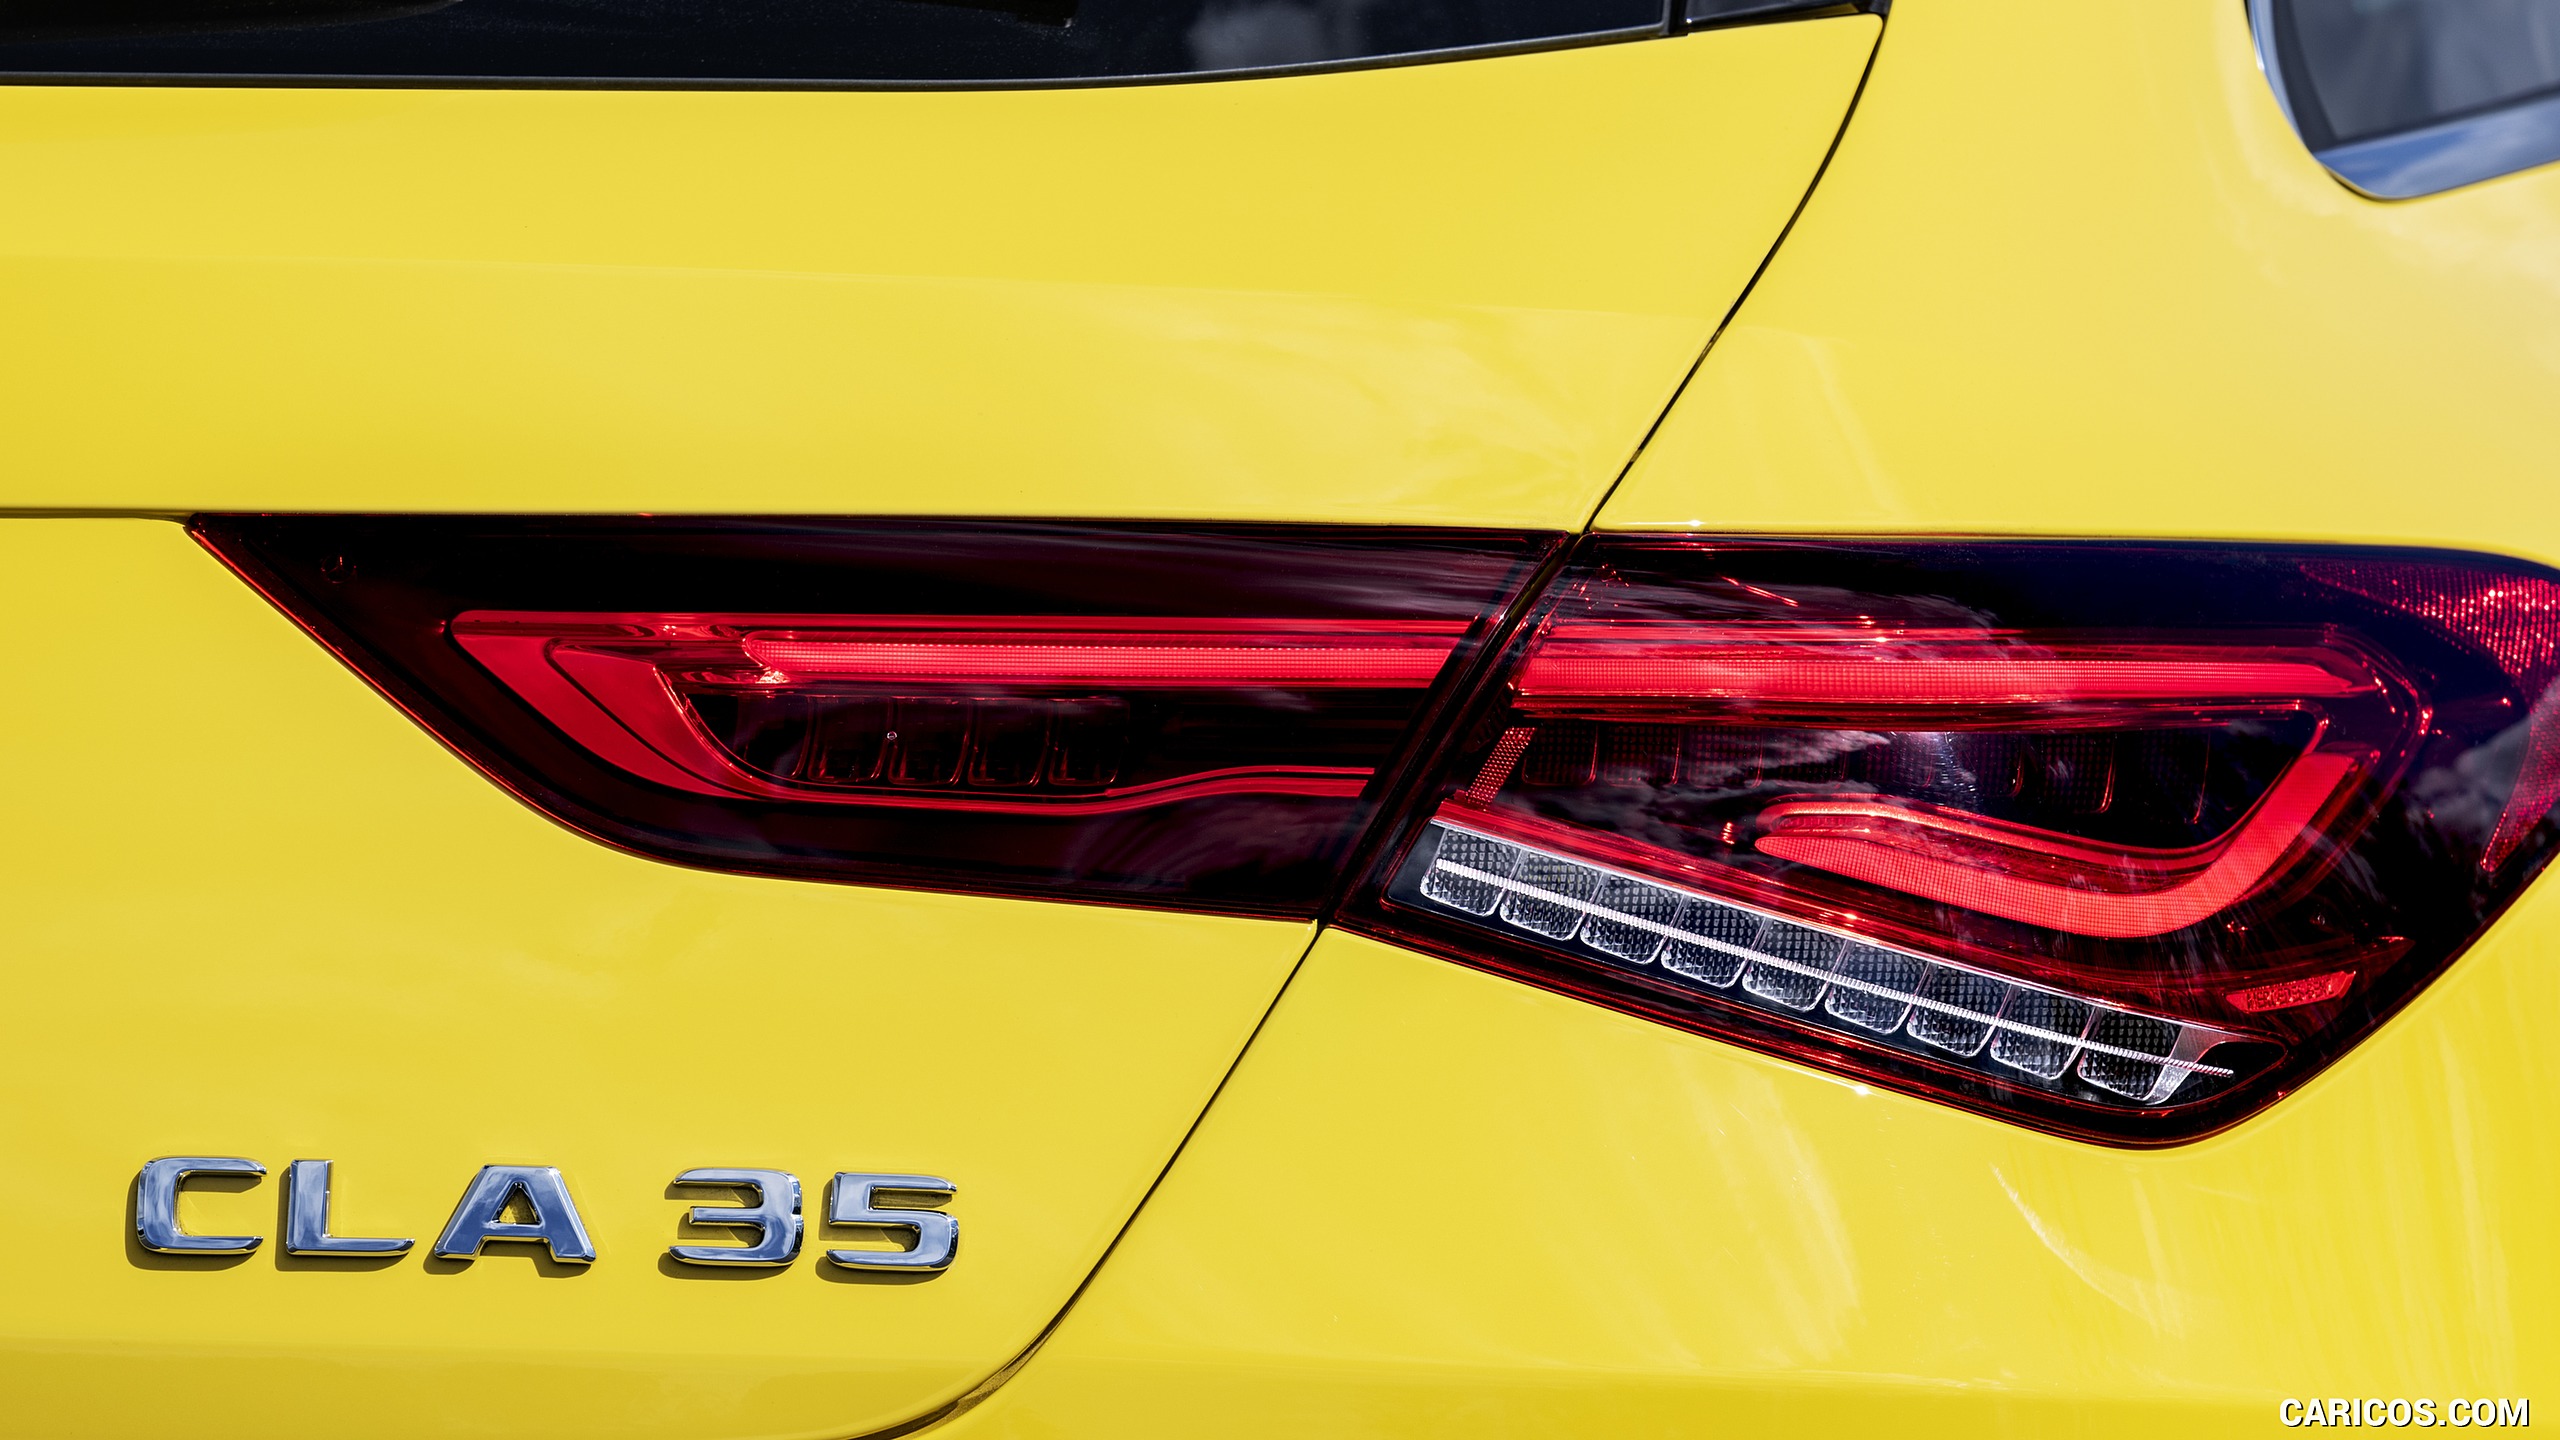 2020 Mercedes-AMG CLA 35 4MATIC Shooting Brake - Tail Light, #19 of 21